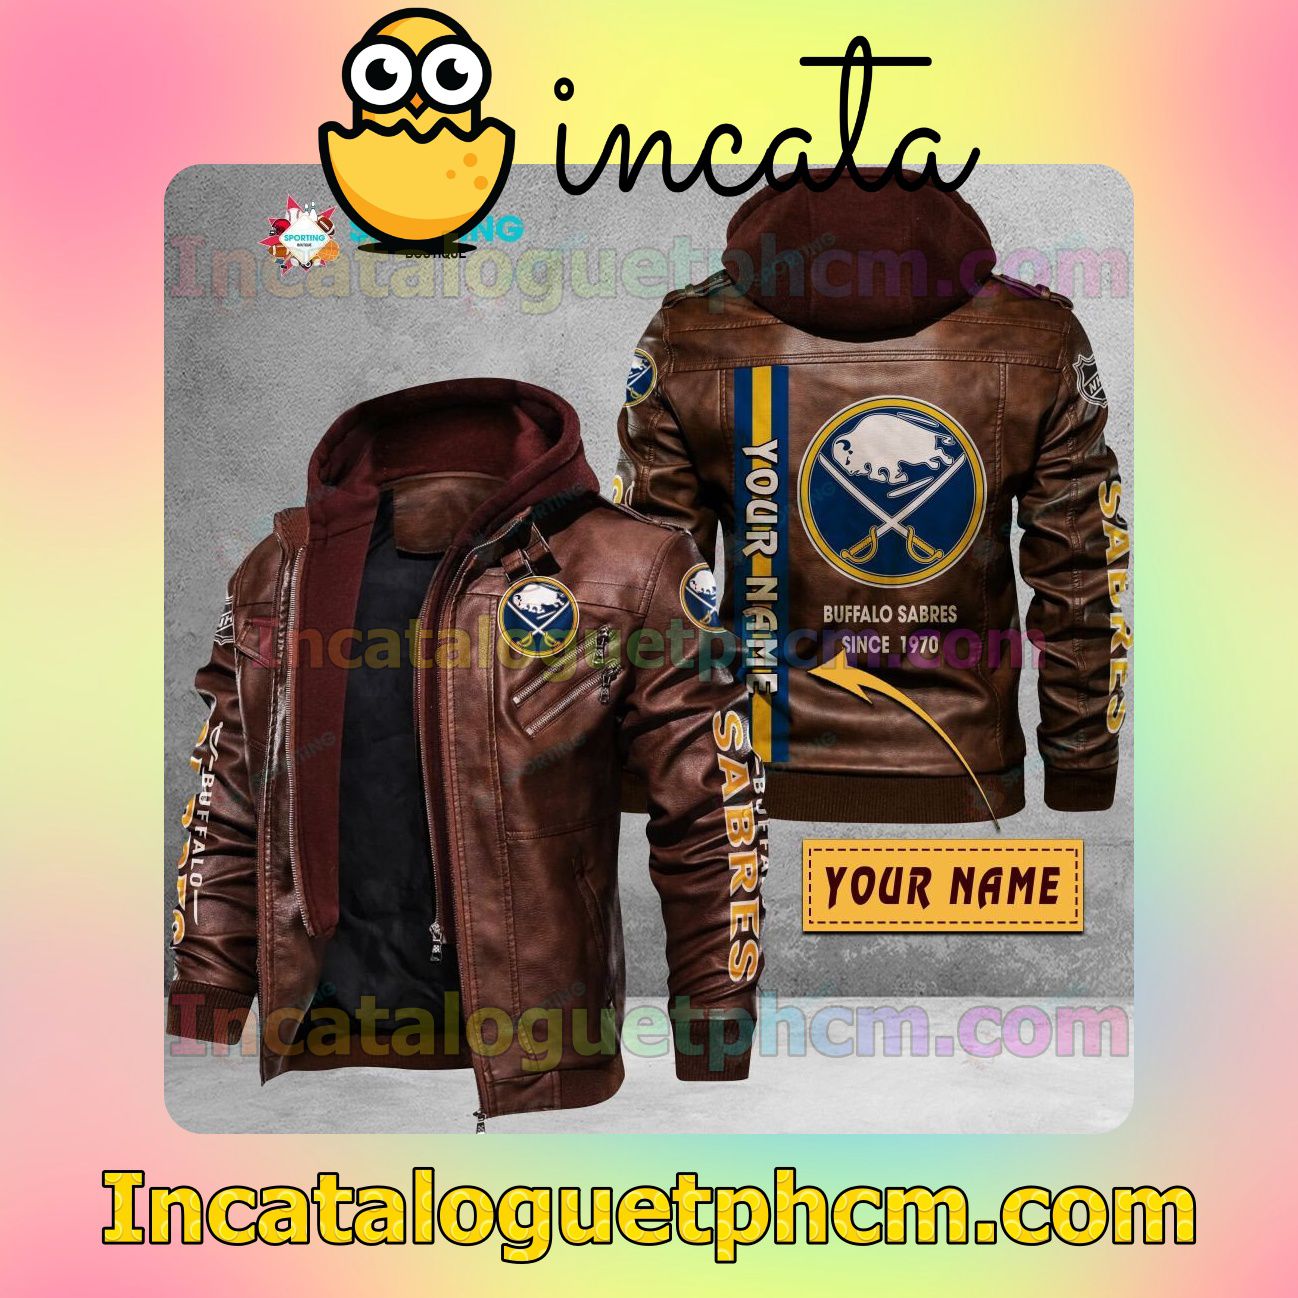 Get Here Buffalo Sabres Customize Brand Uniform Leather Jacket